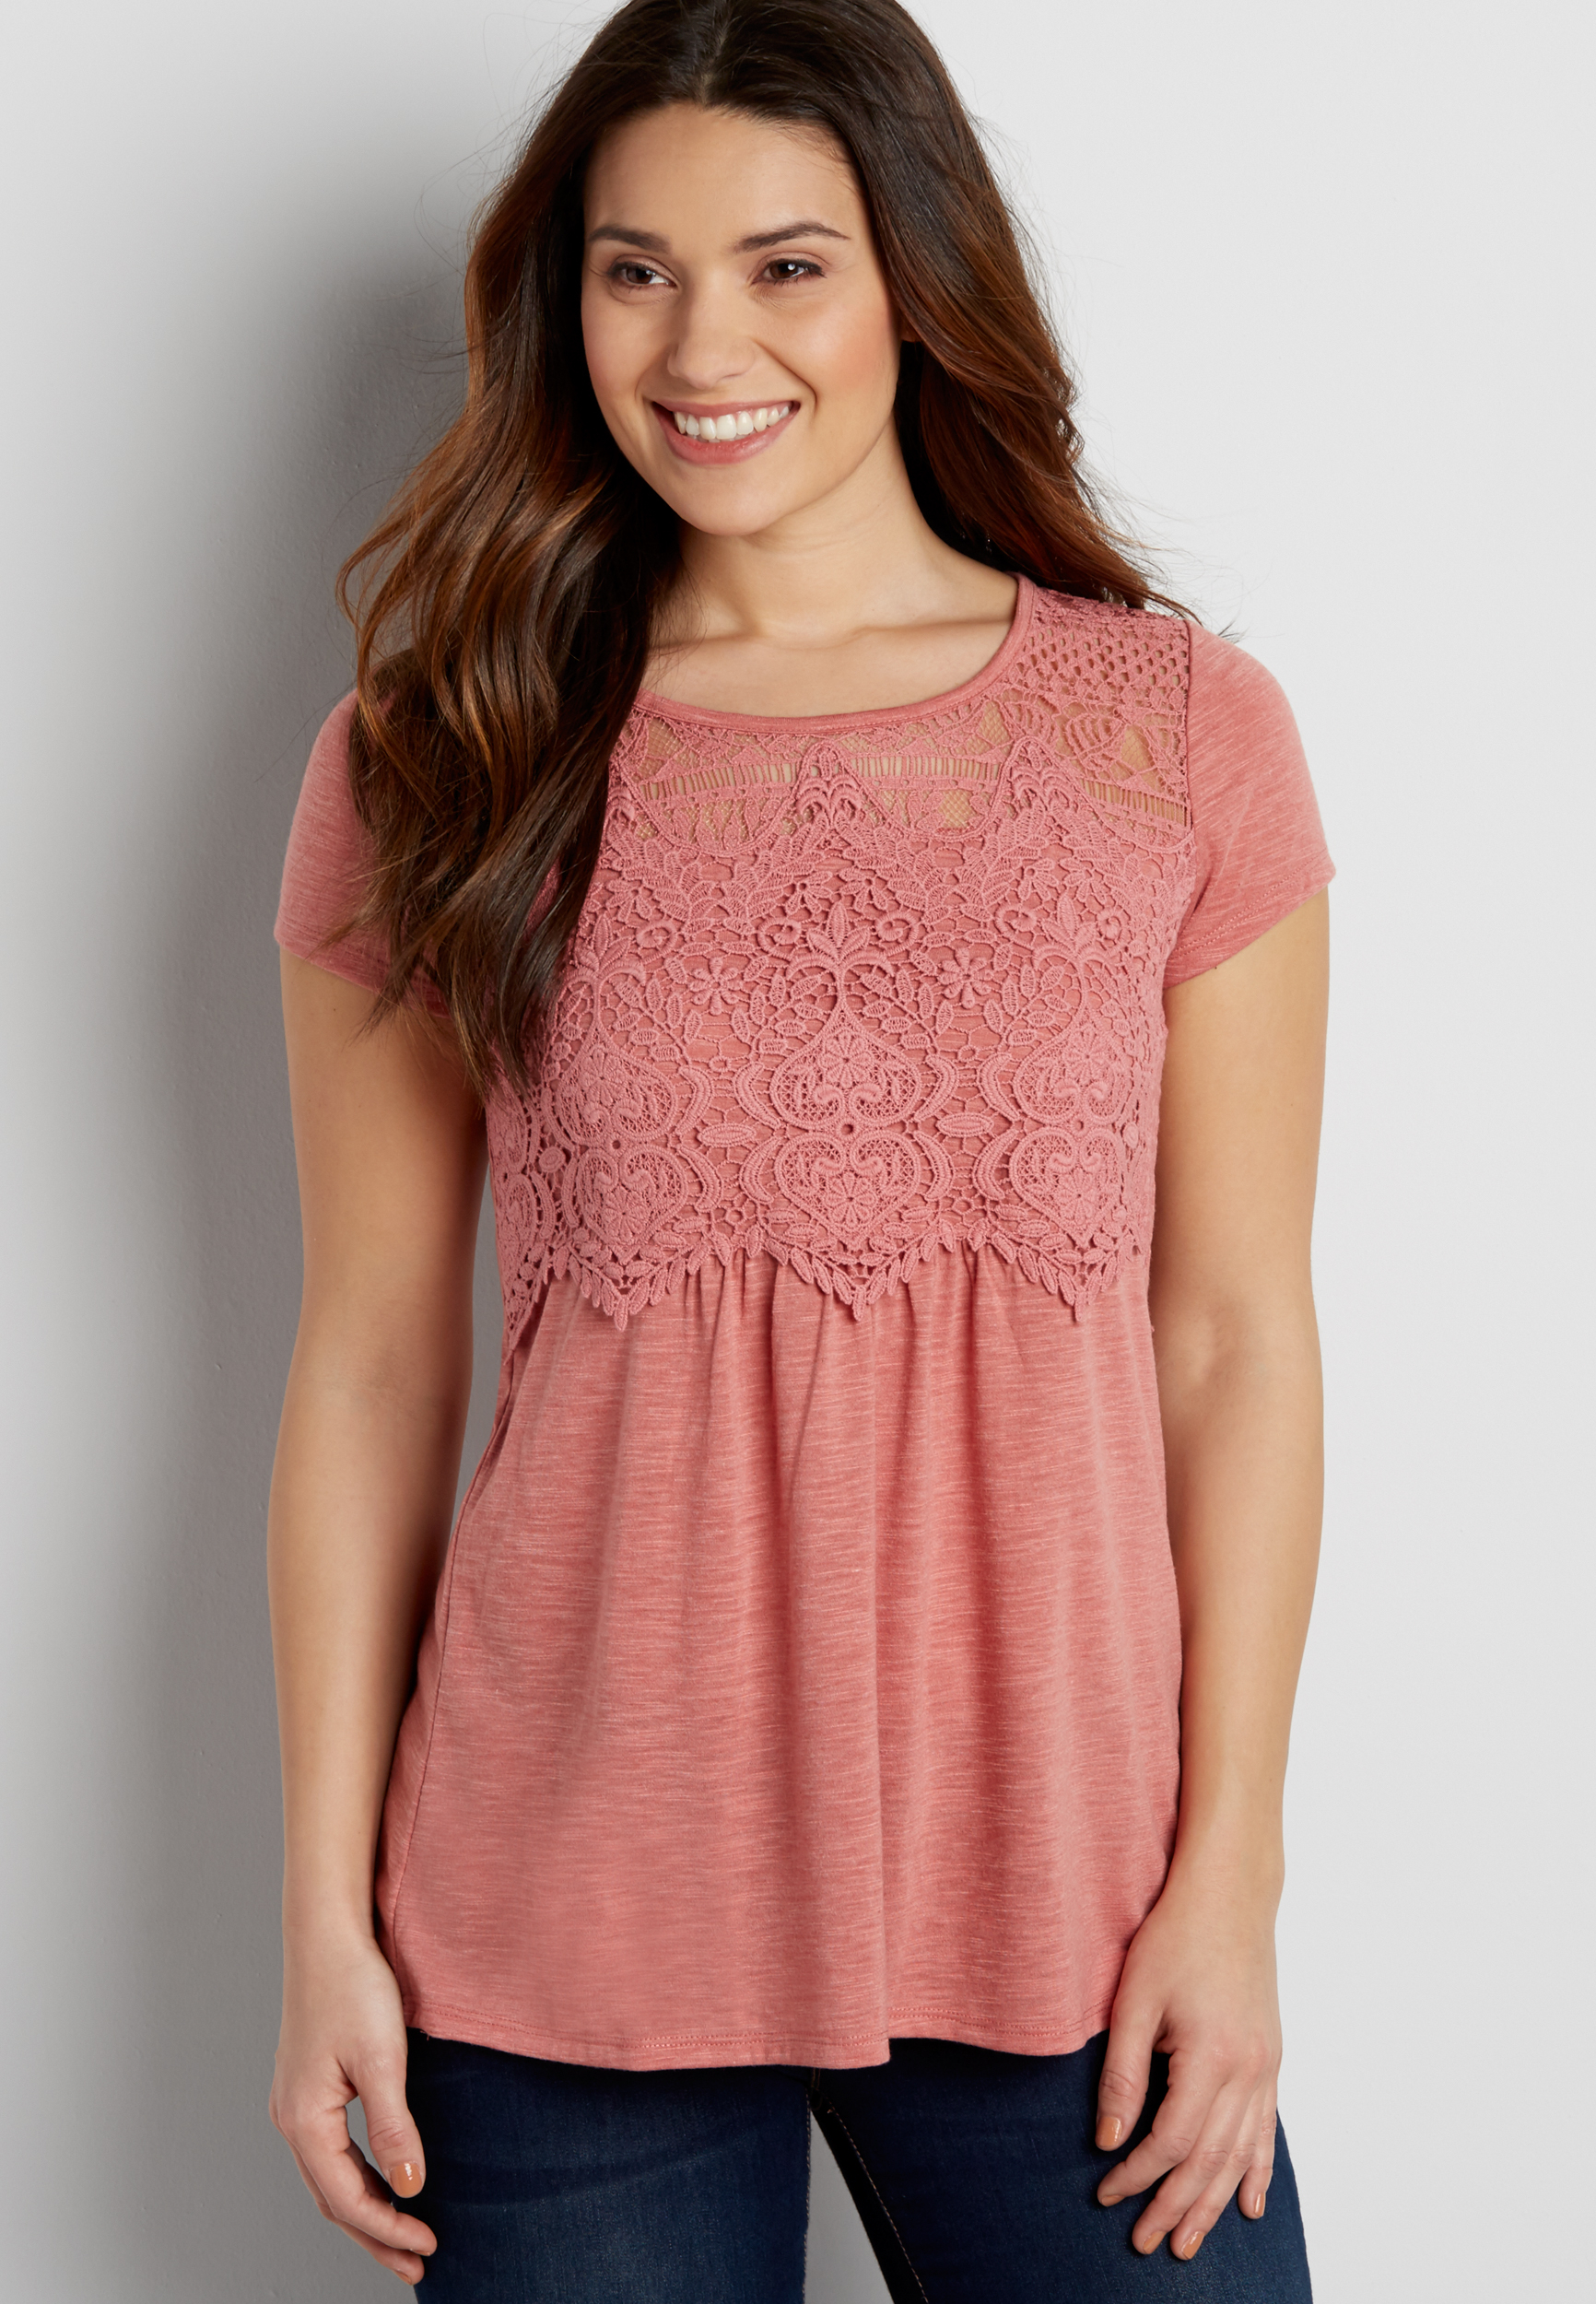 tee with lace yoke and crocheted overlay | maurices